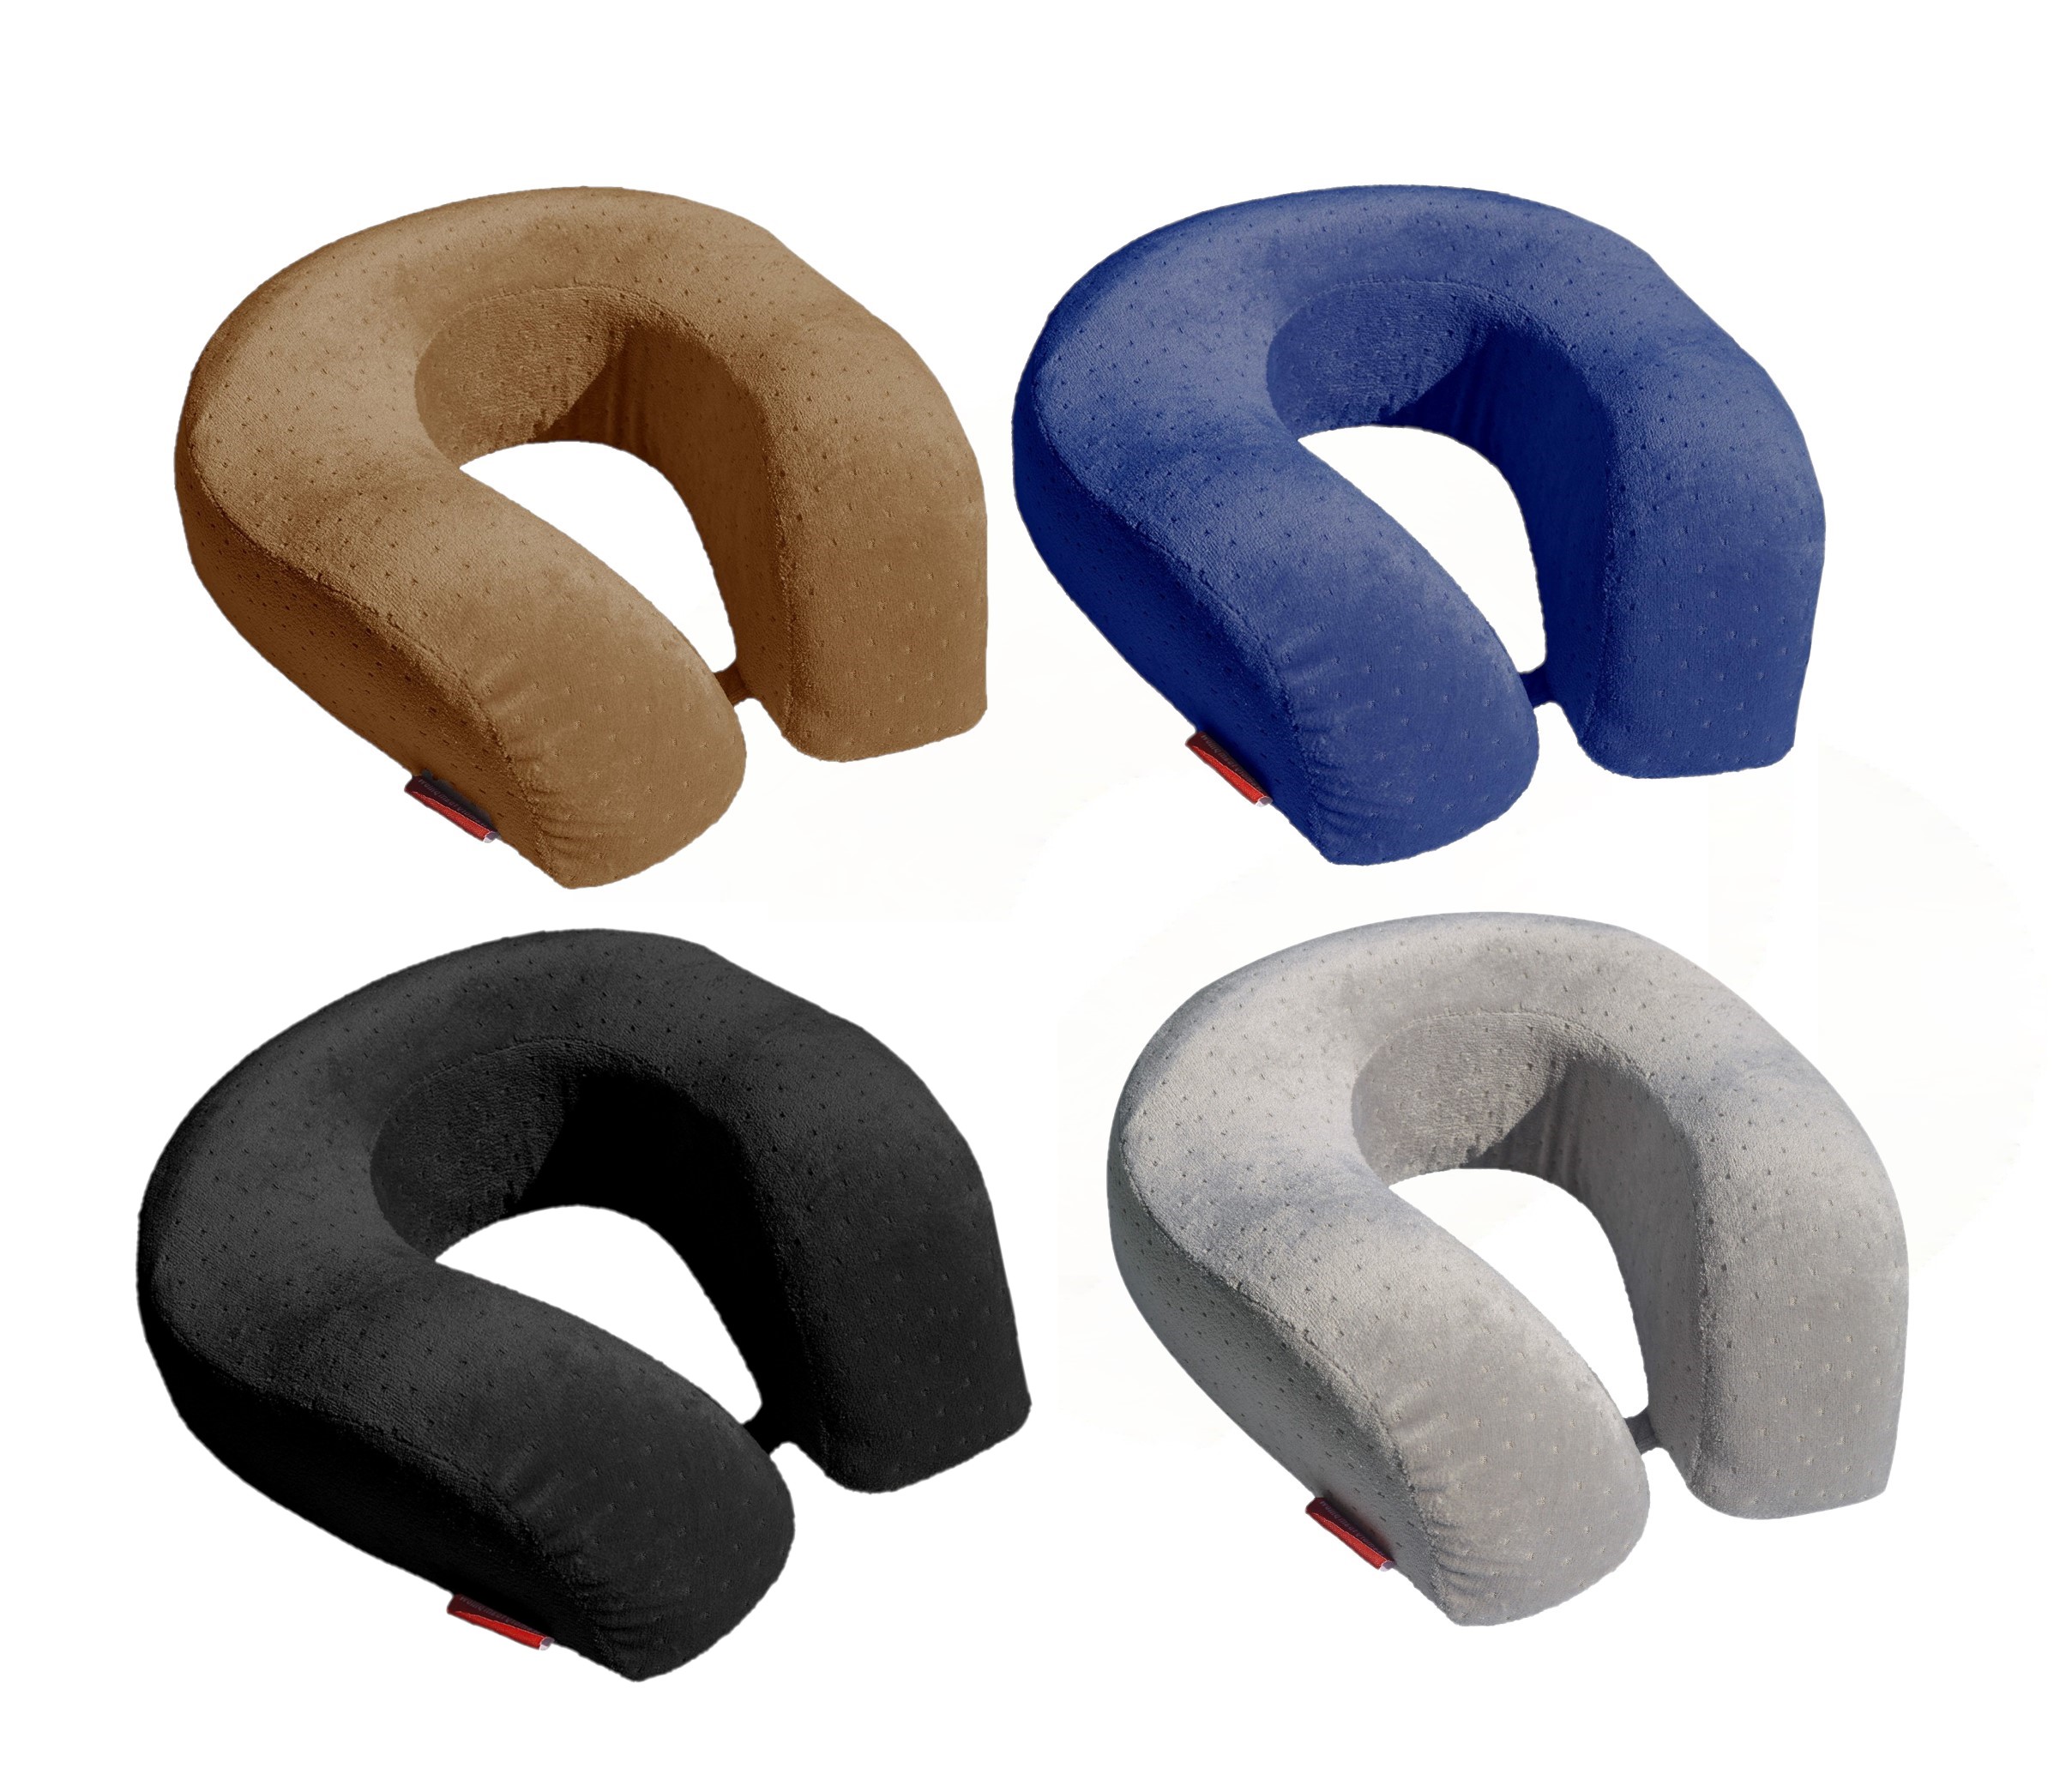 Bookishbunny 2 Pack Memory Foam Large U Shape Travel Pillow Neck And Head Support - image 5 of 6